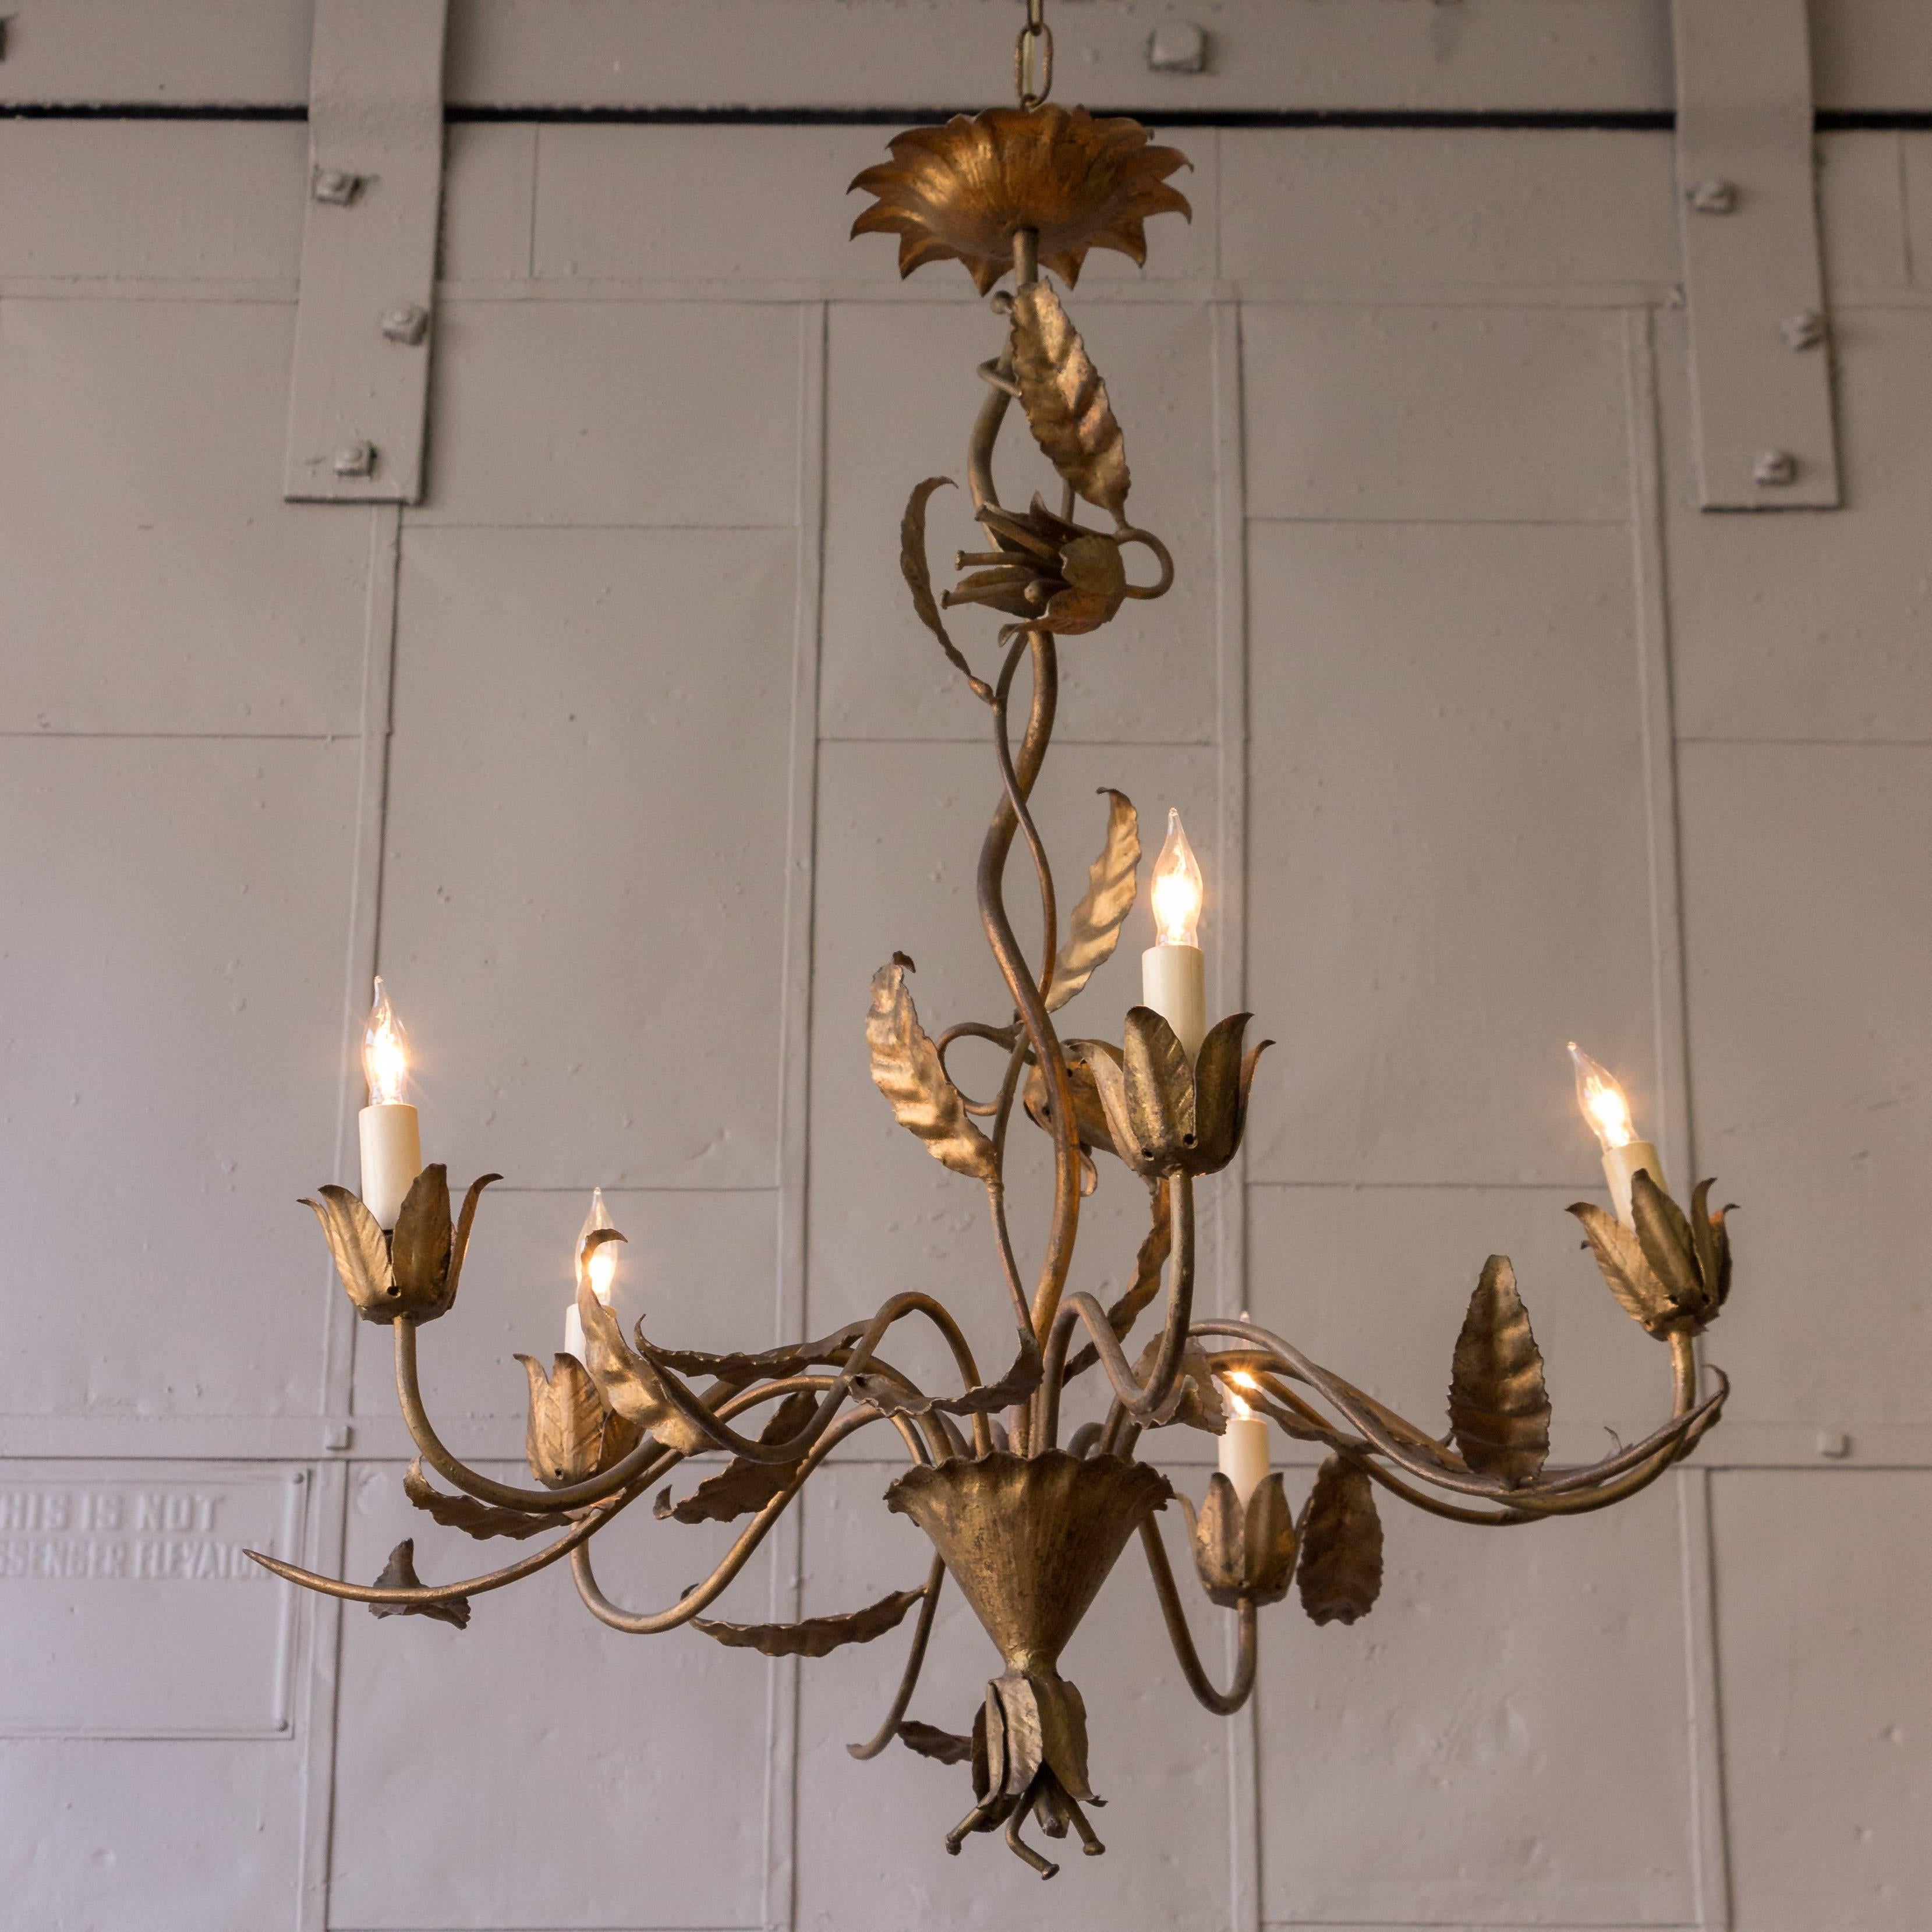 Whimsical floral motif chandelier with vine, leaf and flower designs. Chandelier has five arms.